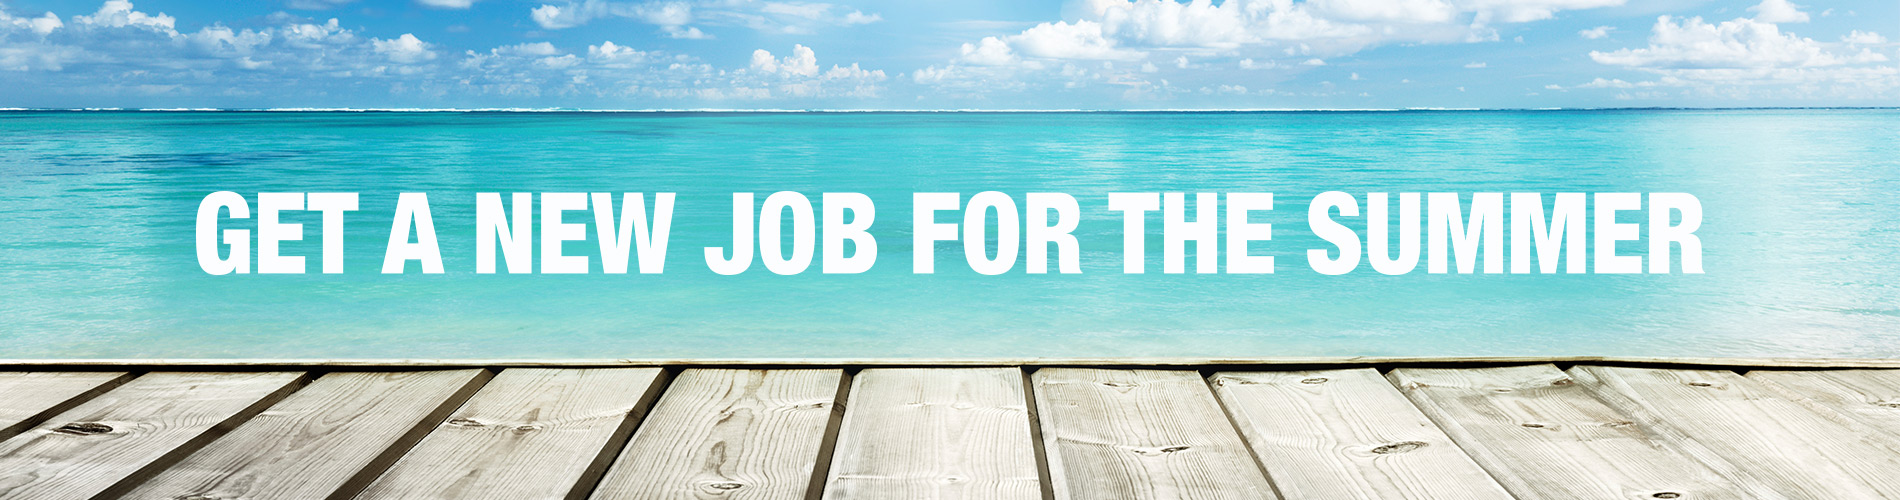 Summer Hiring Front Page Banner - Version 4